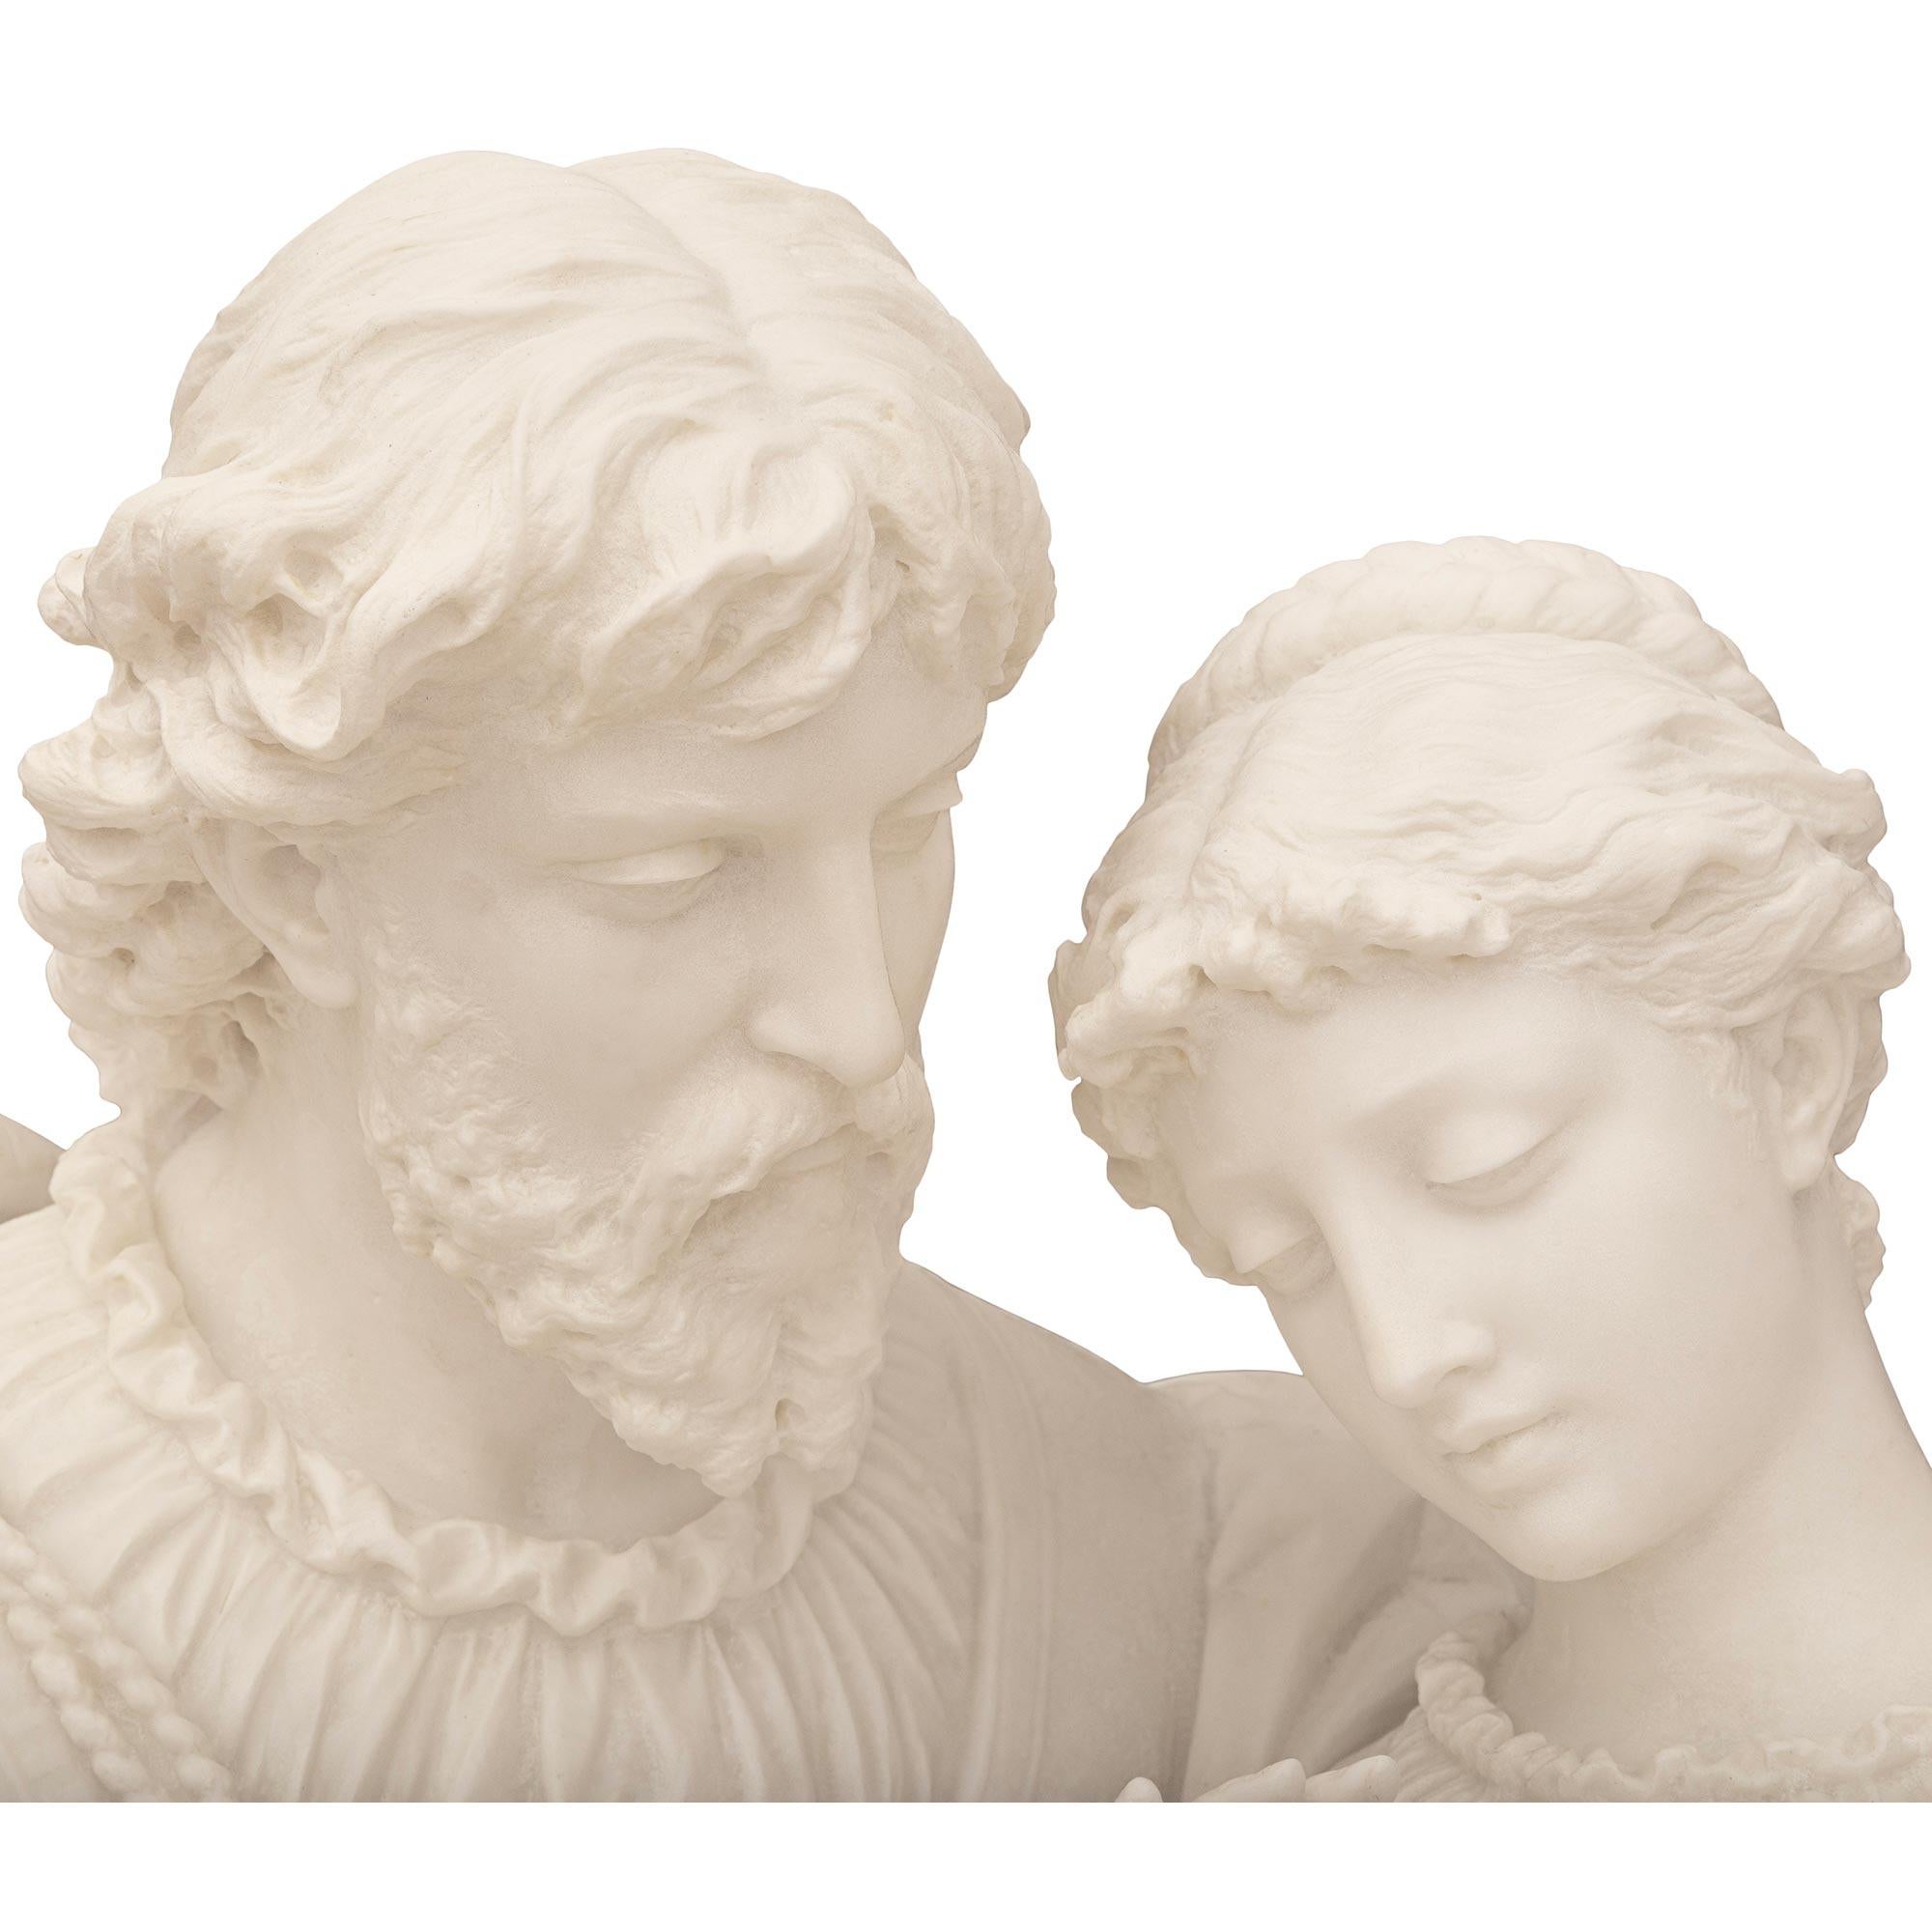 An impressive and high quality Italian 19th century white Carrara and Rosso Levanto marble statue of Paolo and Francesca, signed P. Romanelli. This exquisite sculpture of Paolo and Francesca is depicting a scene from Dante's divine comedy. This